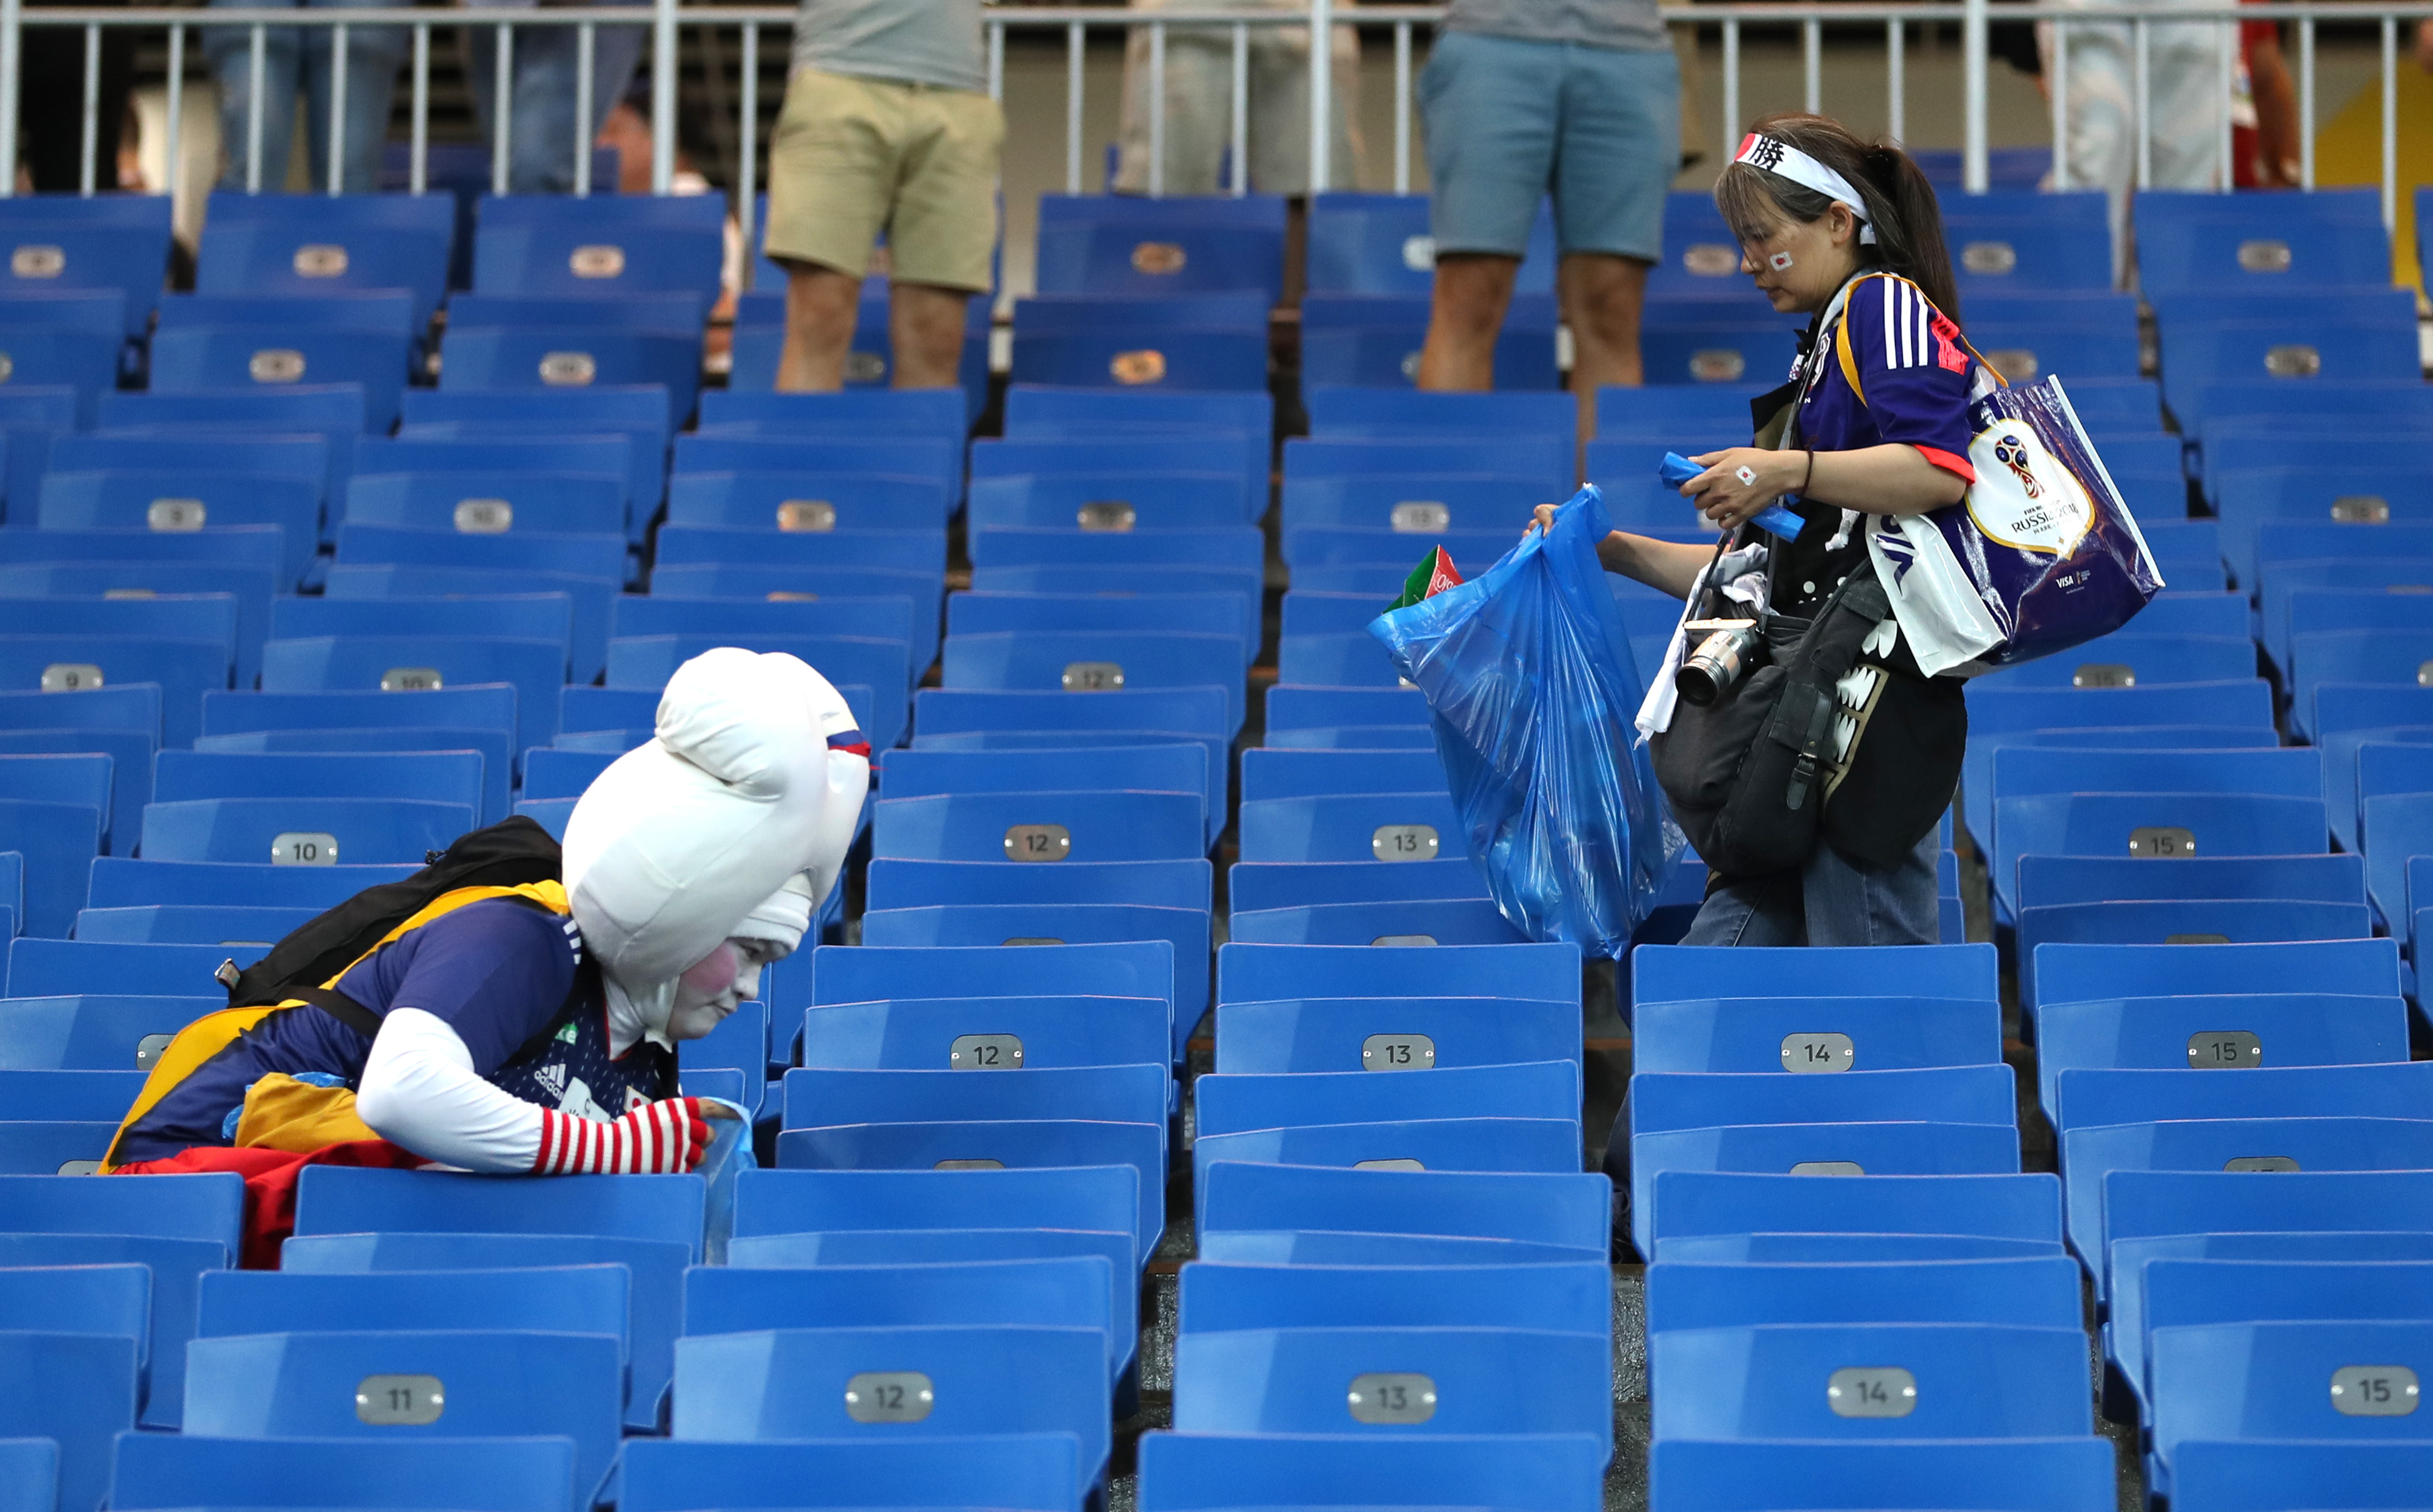 Japan's World Cup fans cleaned up the stadium after they won. Now others  are doing it. - Vox